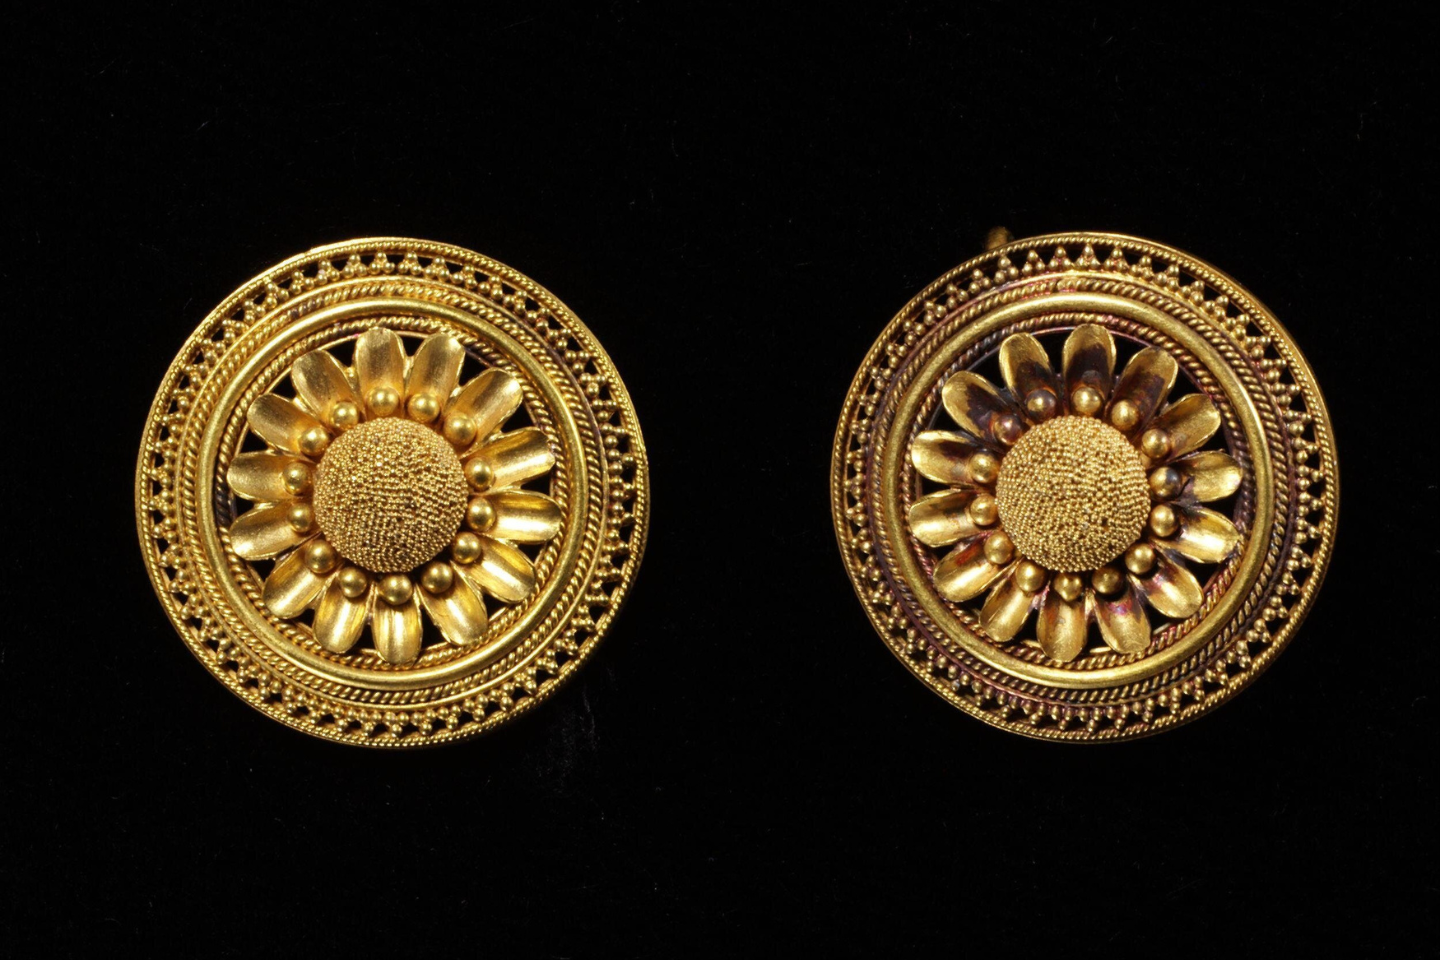 Granulated gold jewelry